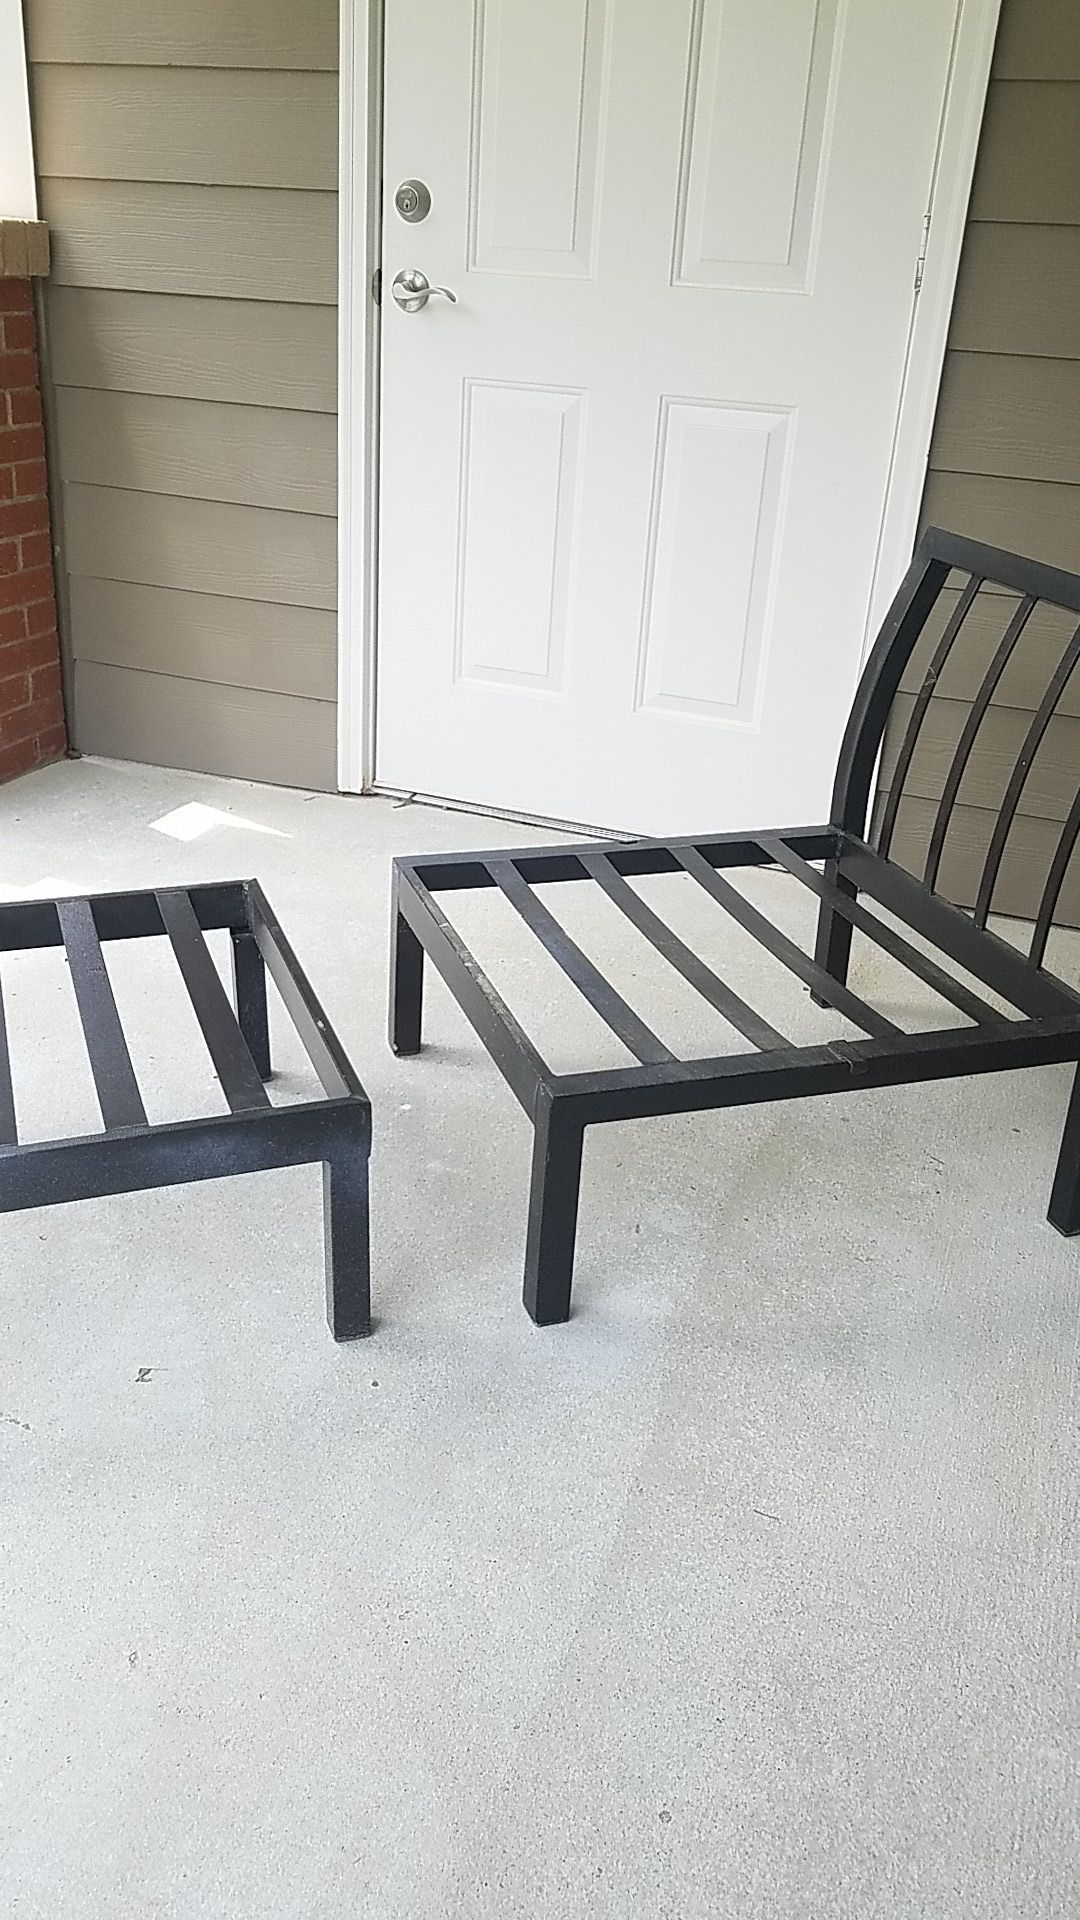 Patio furniture frame and a pillow